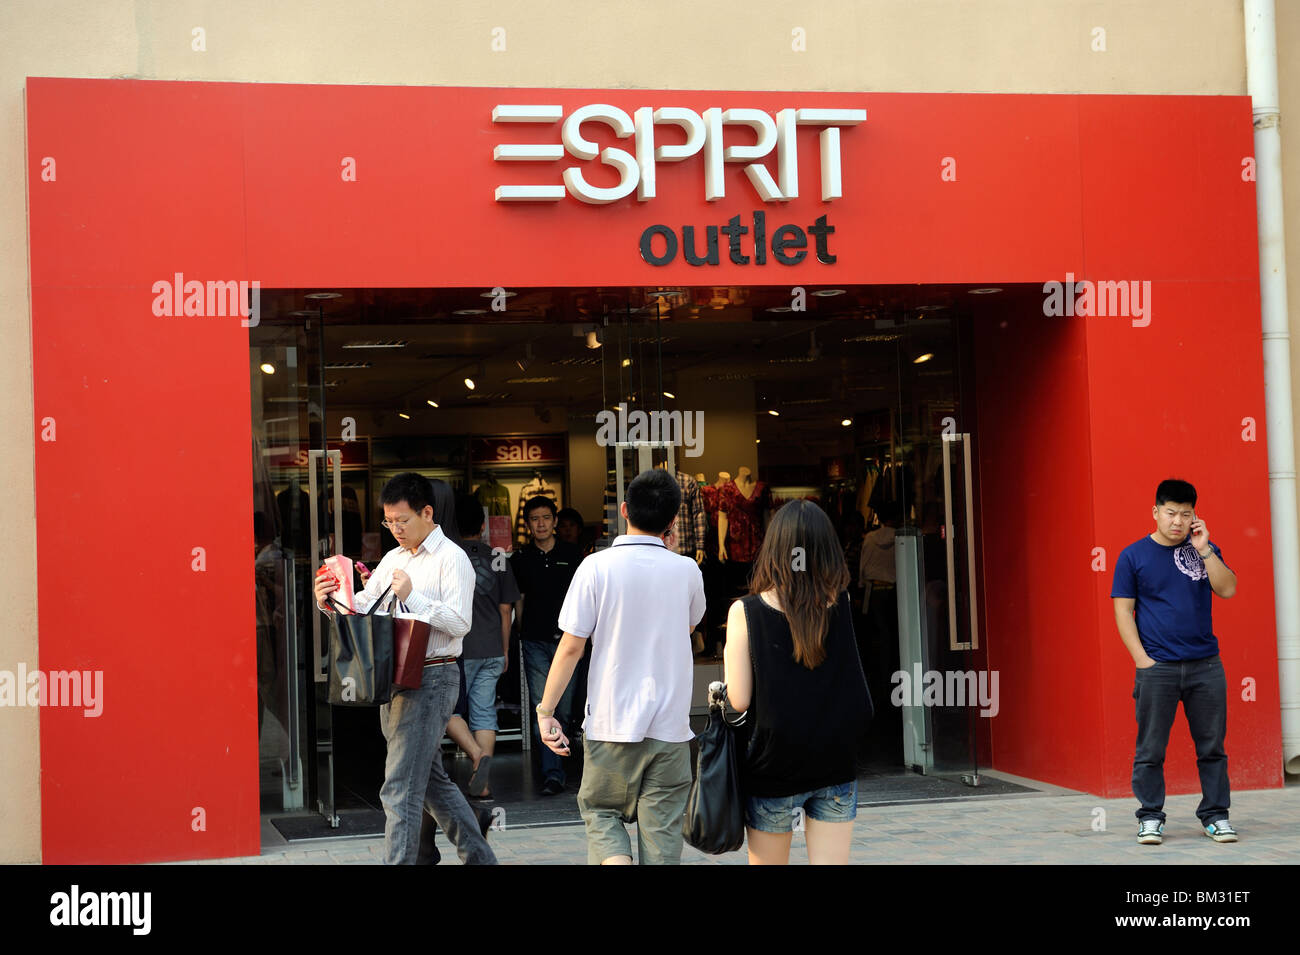 Esprit store at Beijing Scitech Premium Outlet Mall in Beijing, China.  15-May-2010 Stock Photo - Alamy